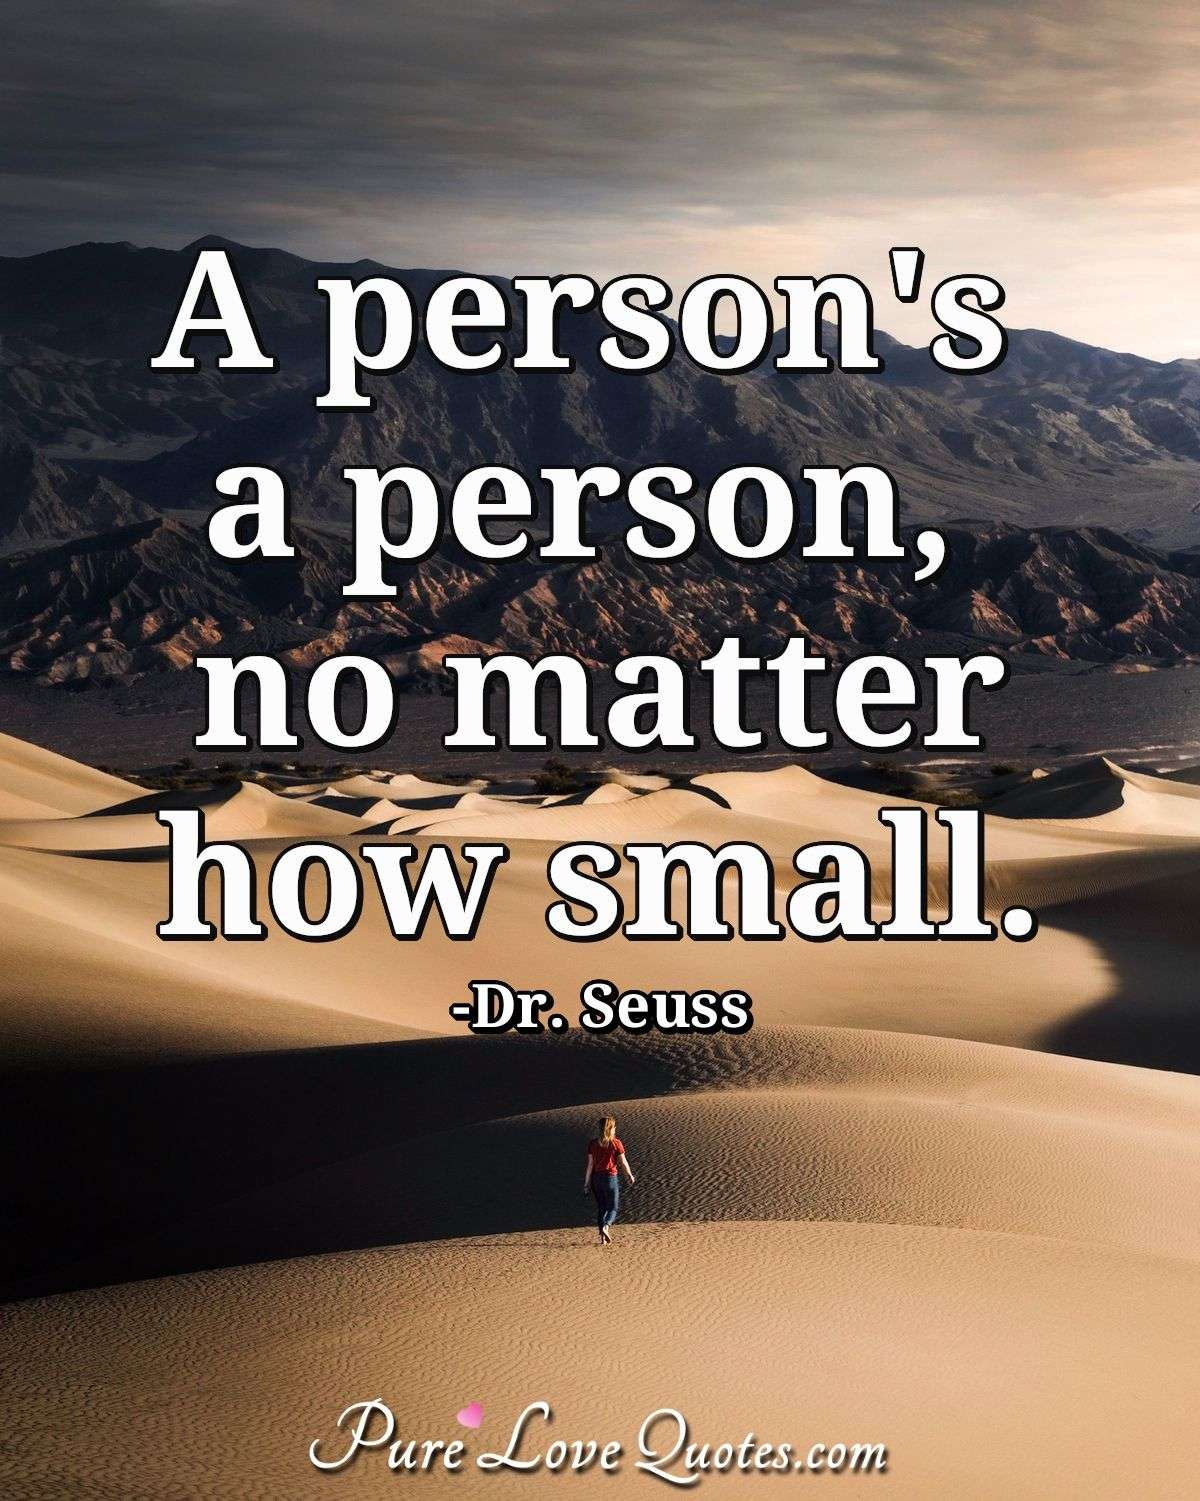 A person's a person, no matter how small. - Theodore Geisel (Dr. Seuss)